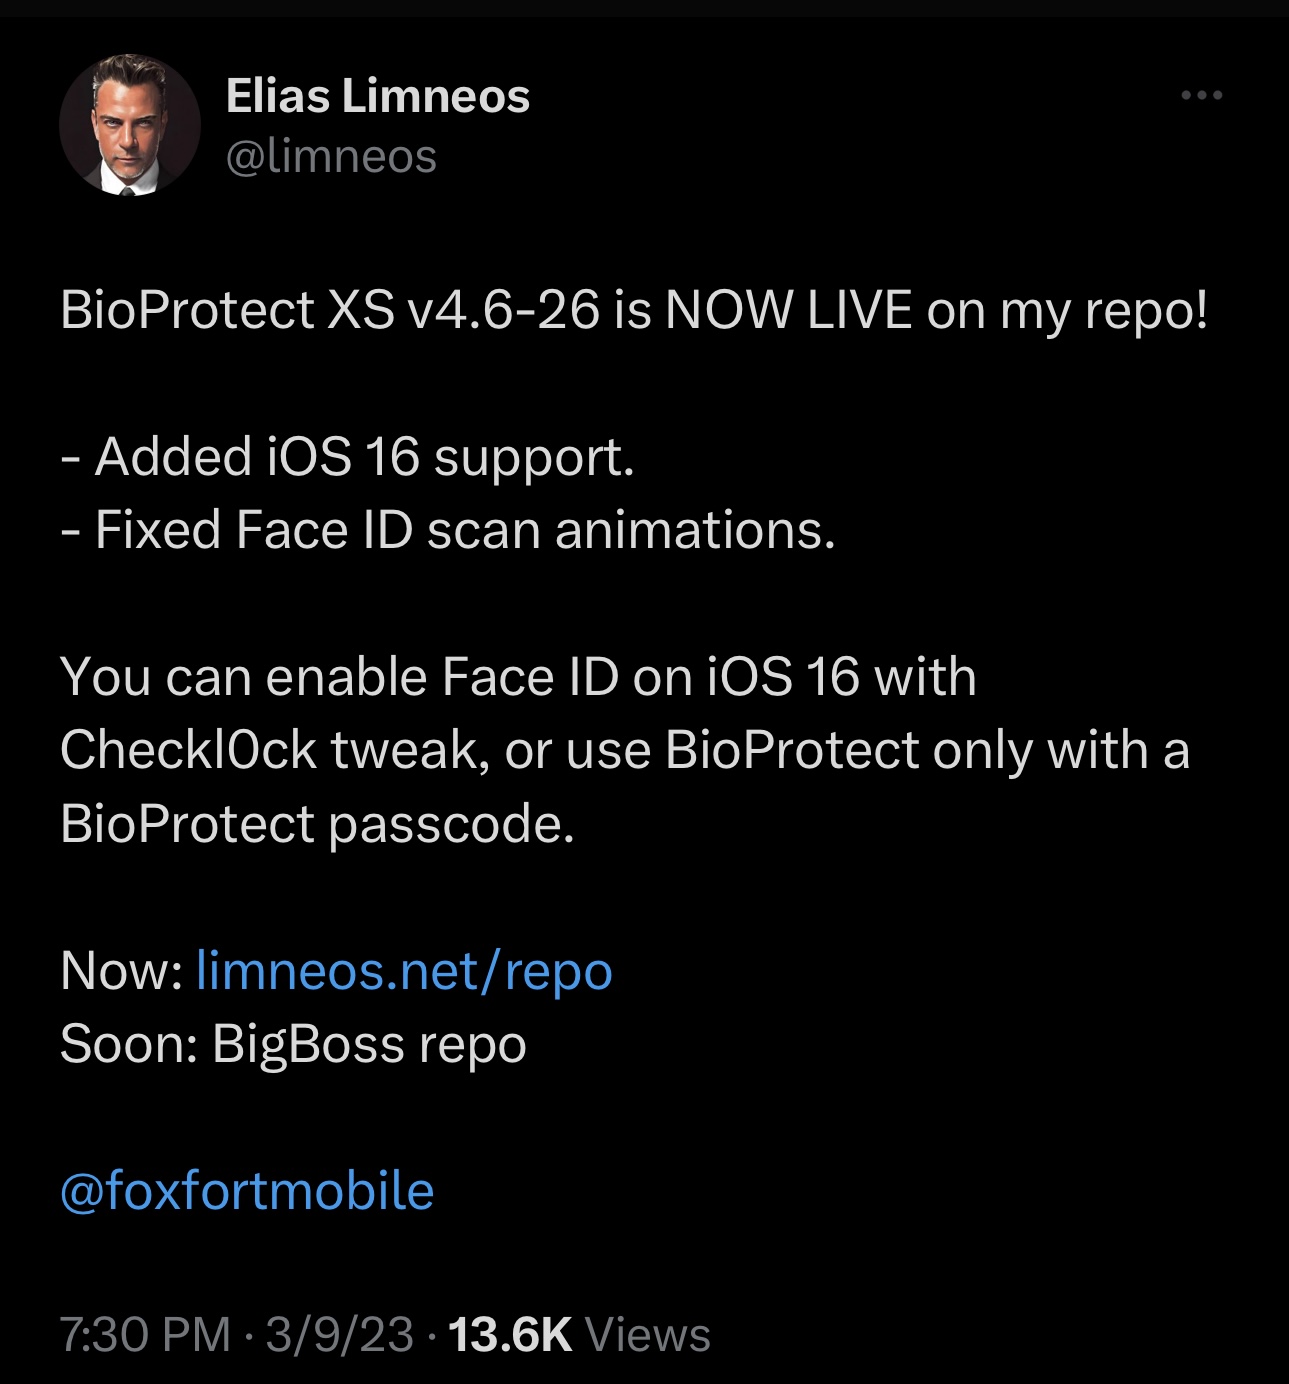 BioProtect XS iOS 16 support added.